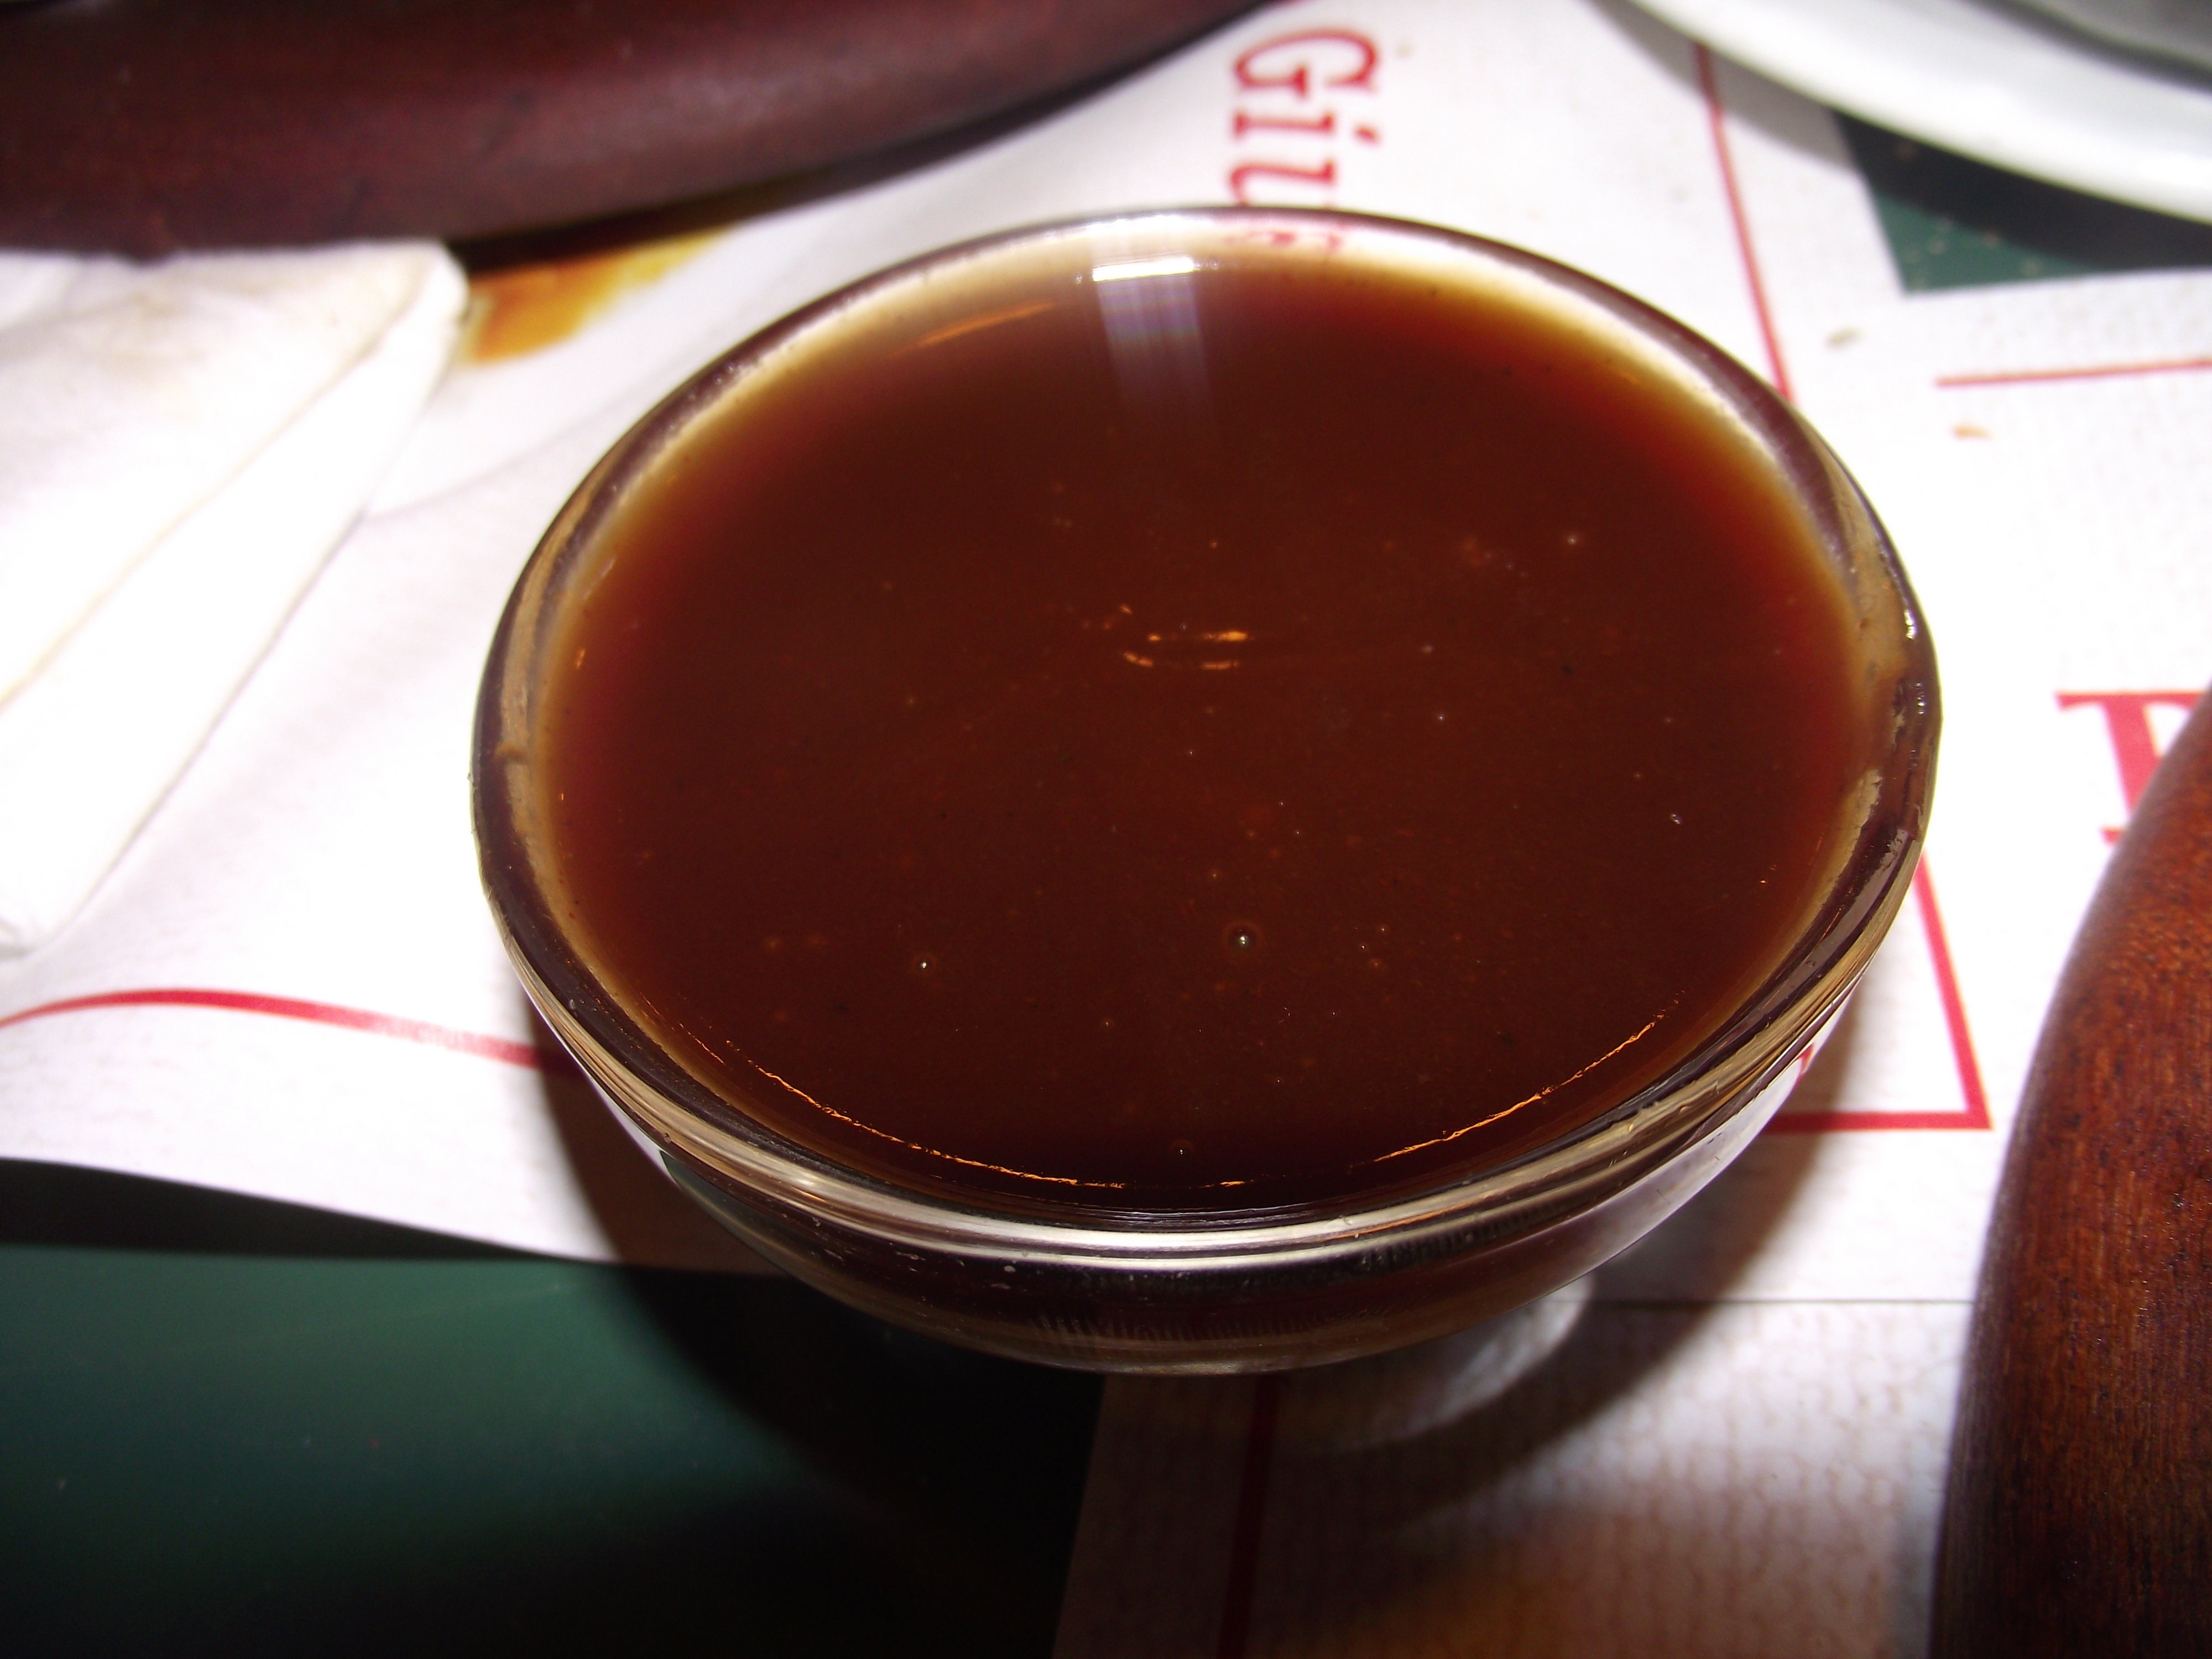 File:Barbecue sauce.JPG - Wikimedia Commons